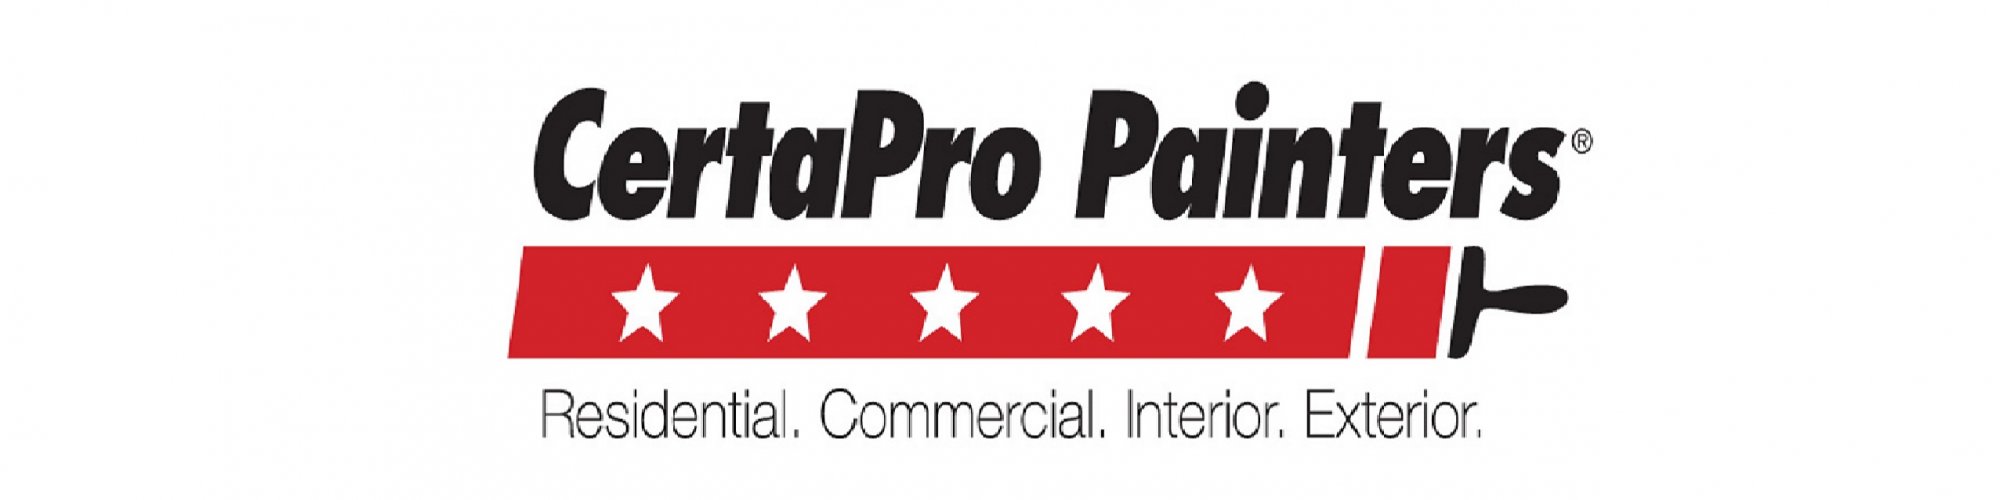 CertaPro Painters® of Blue Bell, PA | StartUs